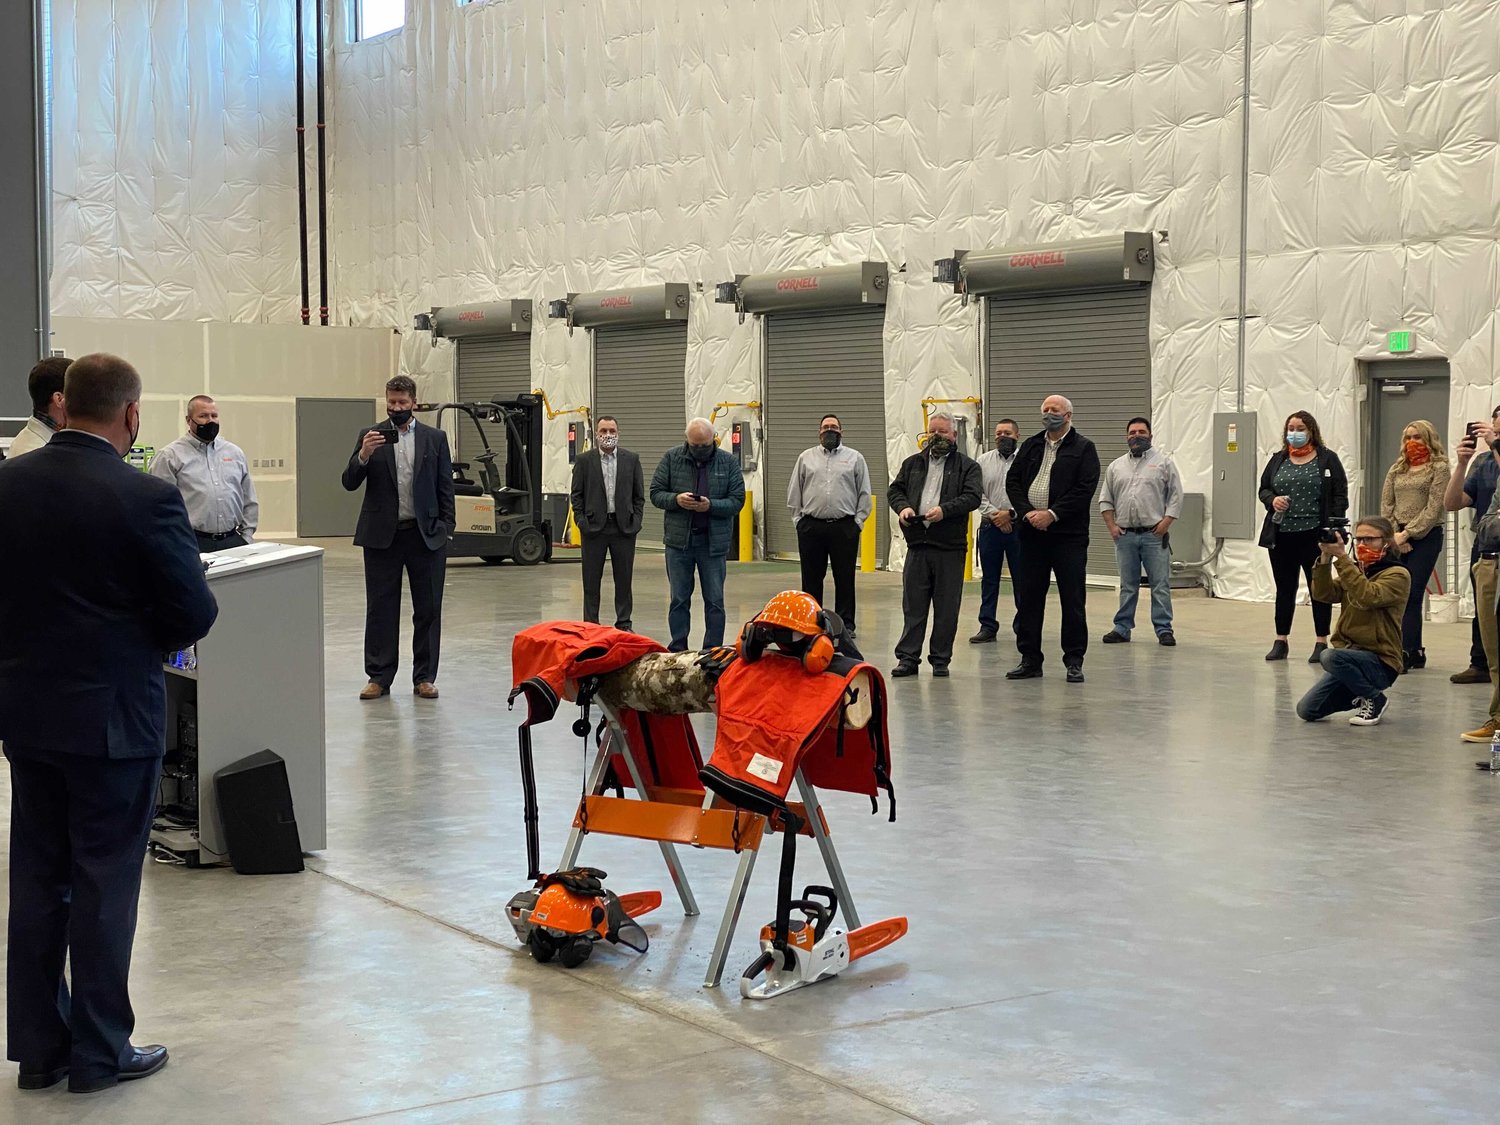 An open house was held at the new STIHL Northwest site in the Port of Centralia on Tuesday.